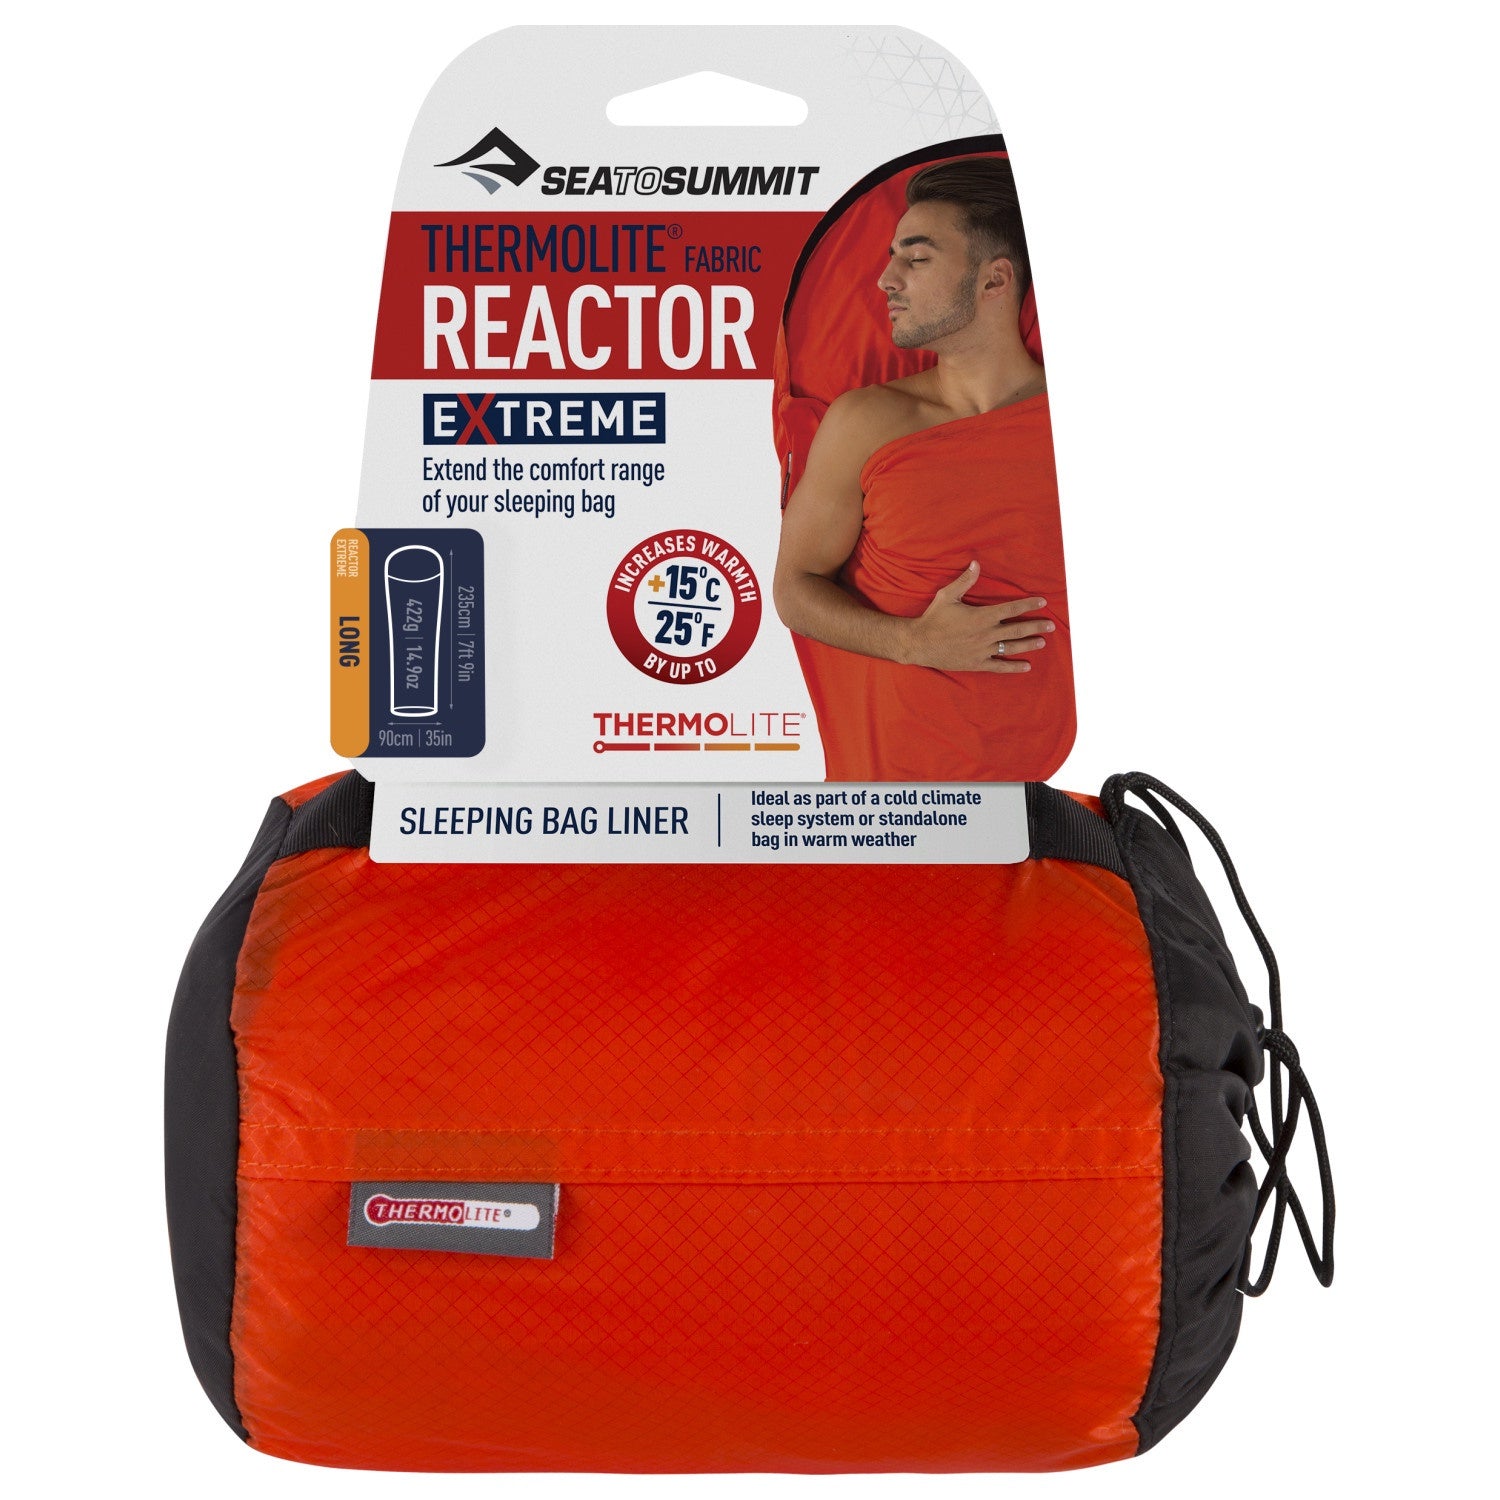 Reactor Liner Thermolite Extreme